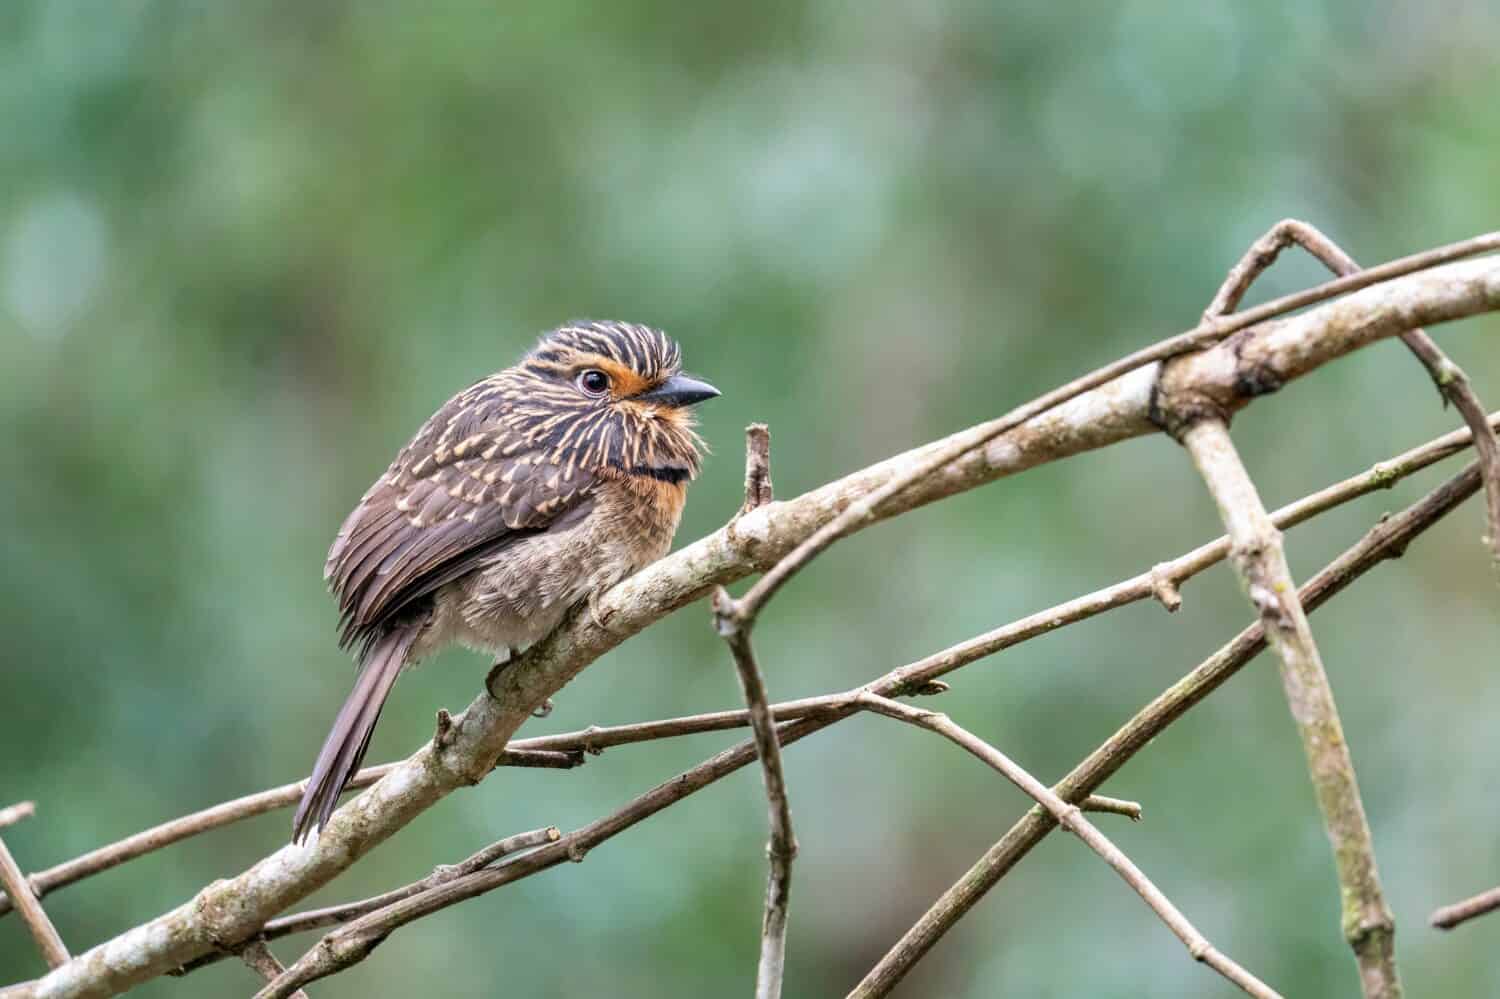 A Beautiful Crescent-chested Puffbird is perching on a twig in the forest of Alto Castelinho, Vargem Alta - Espírito Santo, Brazil